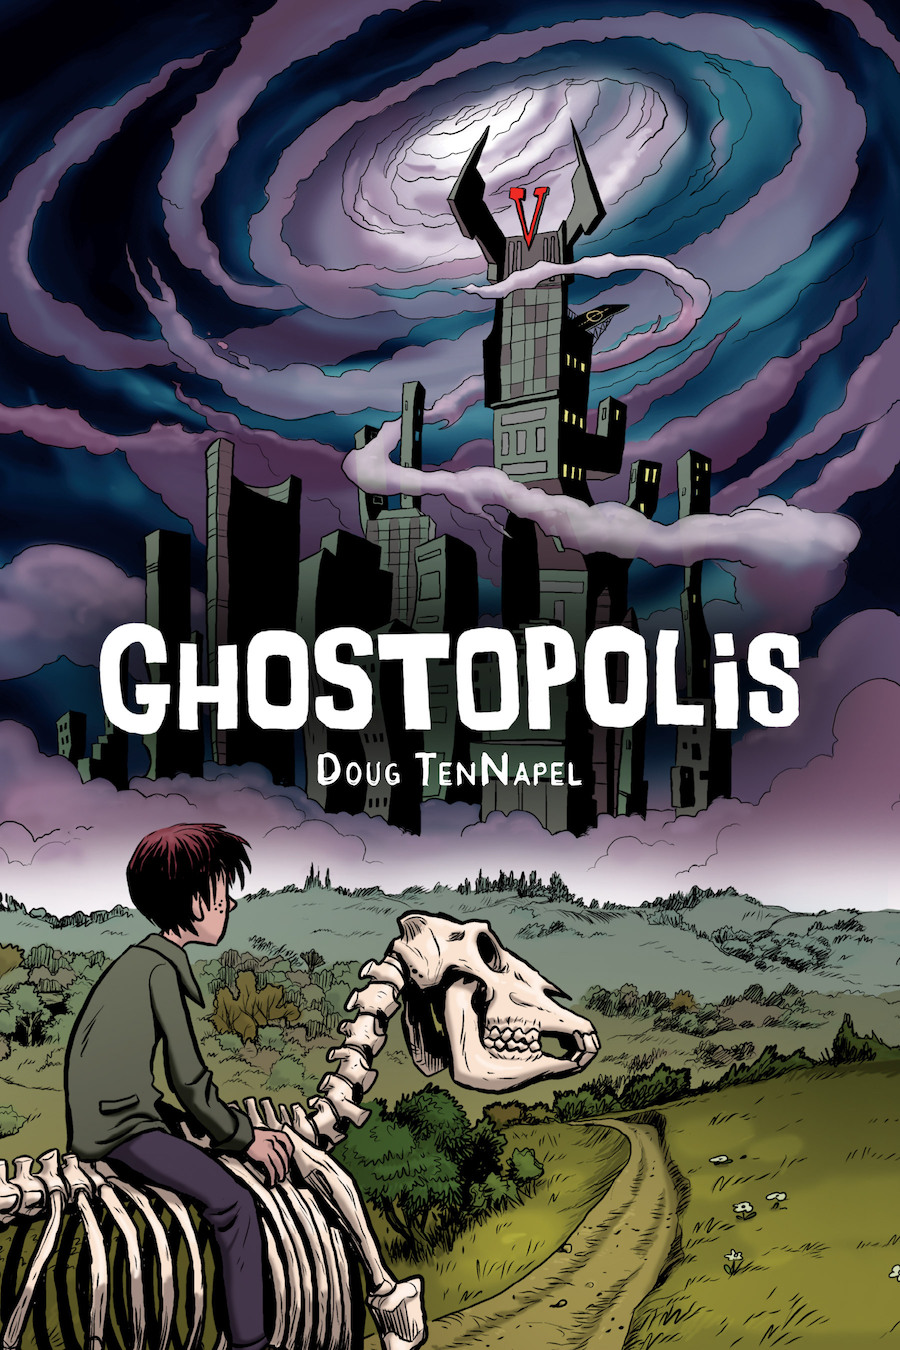 The cover of Ghostopolis